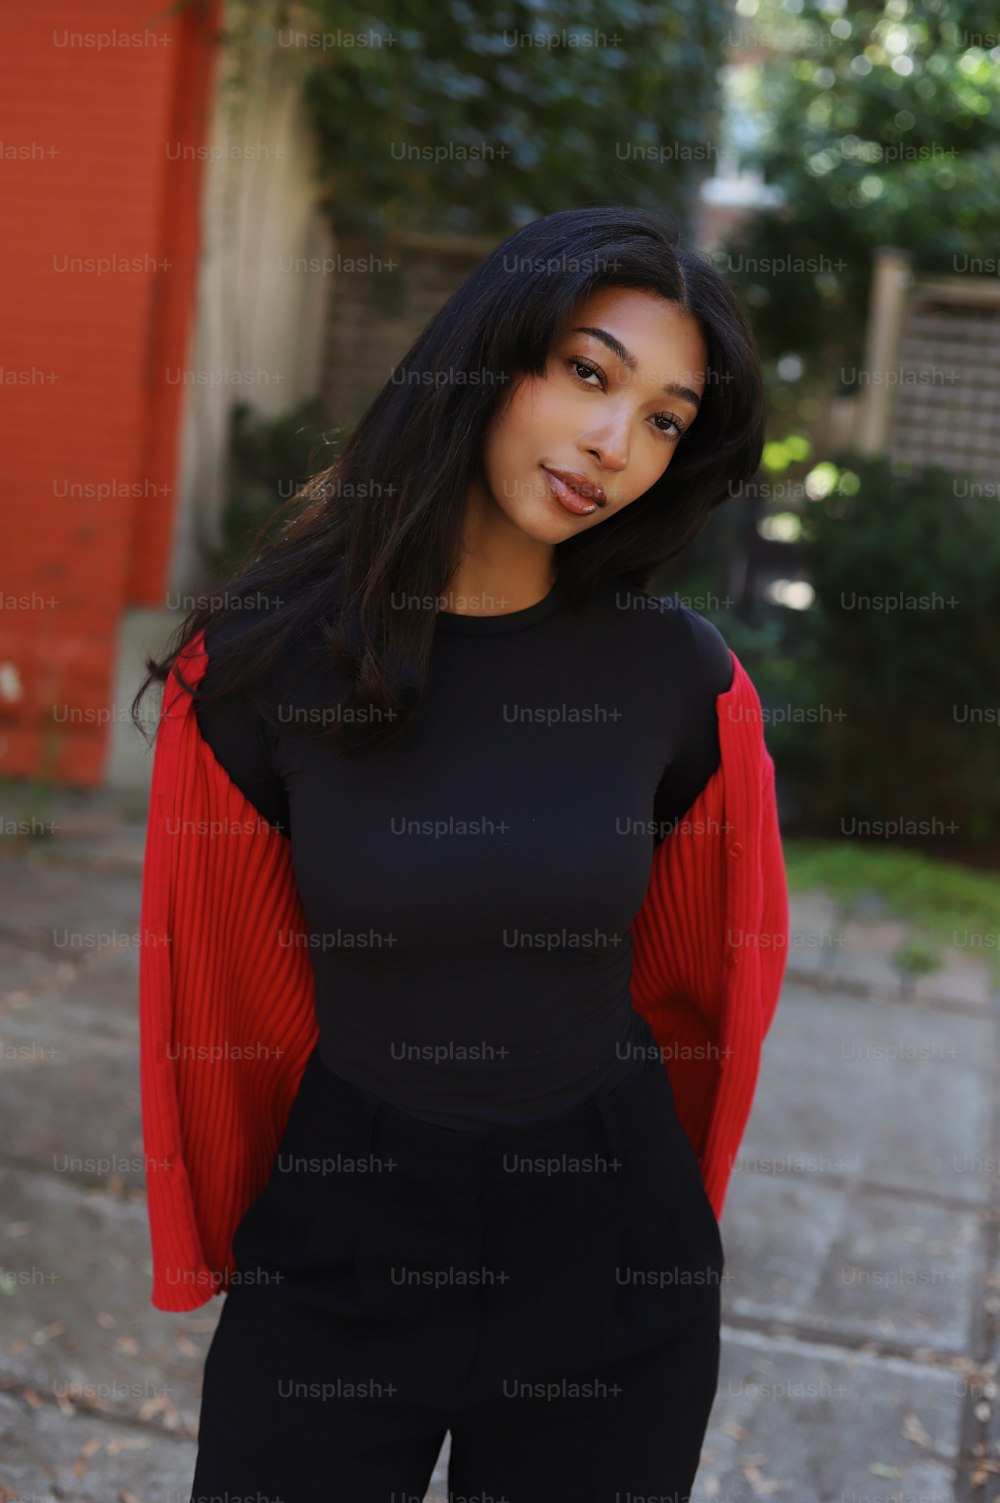 a woman standing on a sidewalk wearing a black and red top